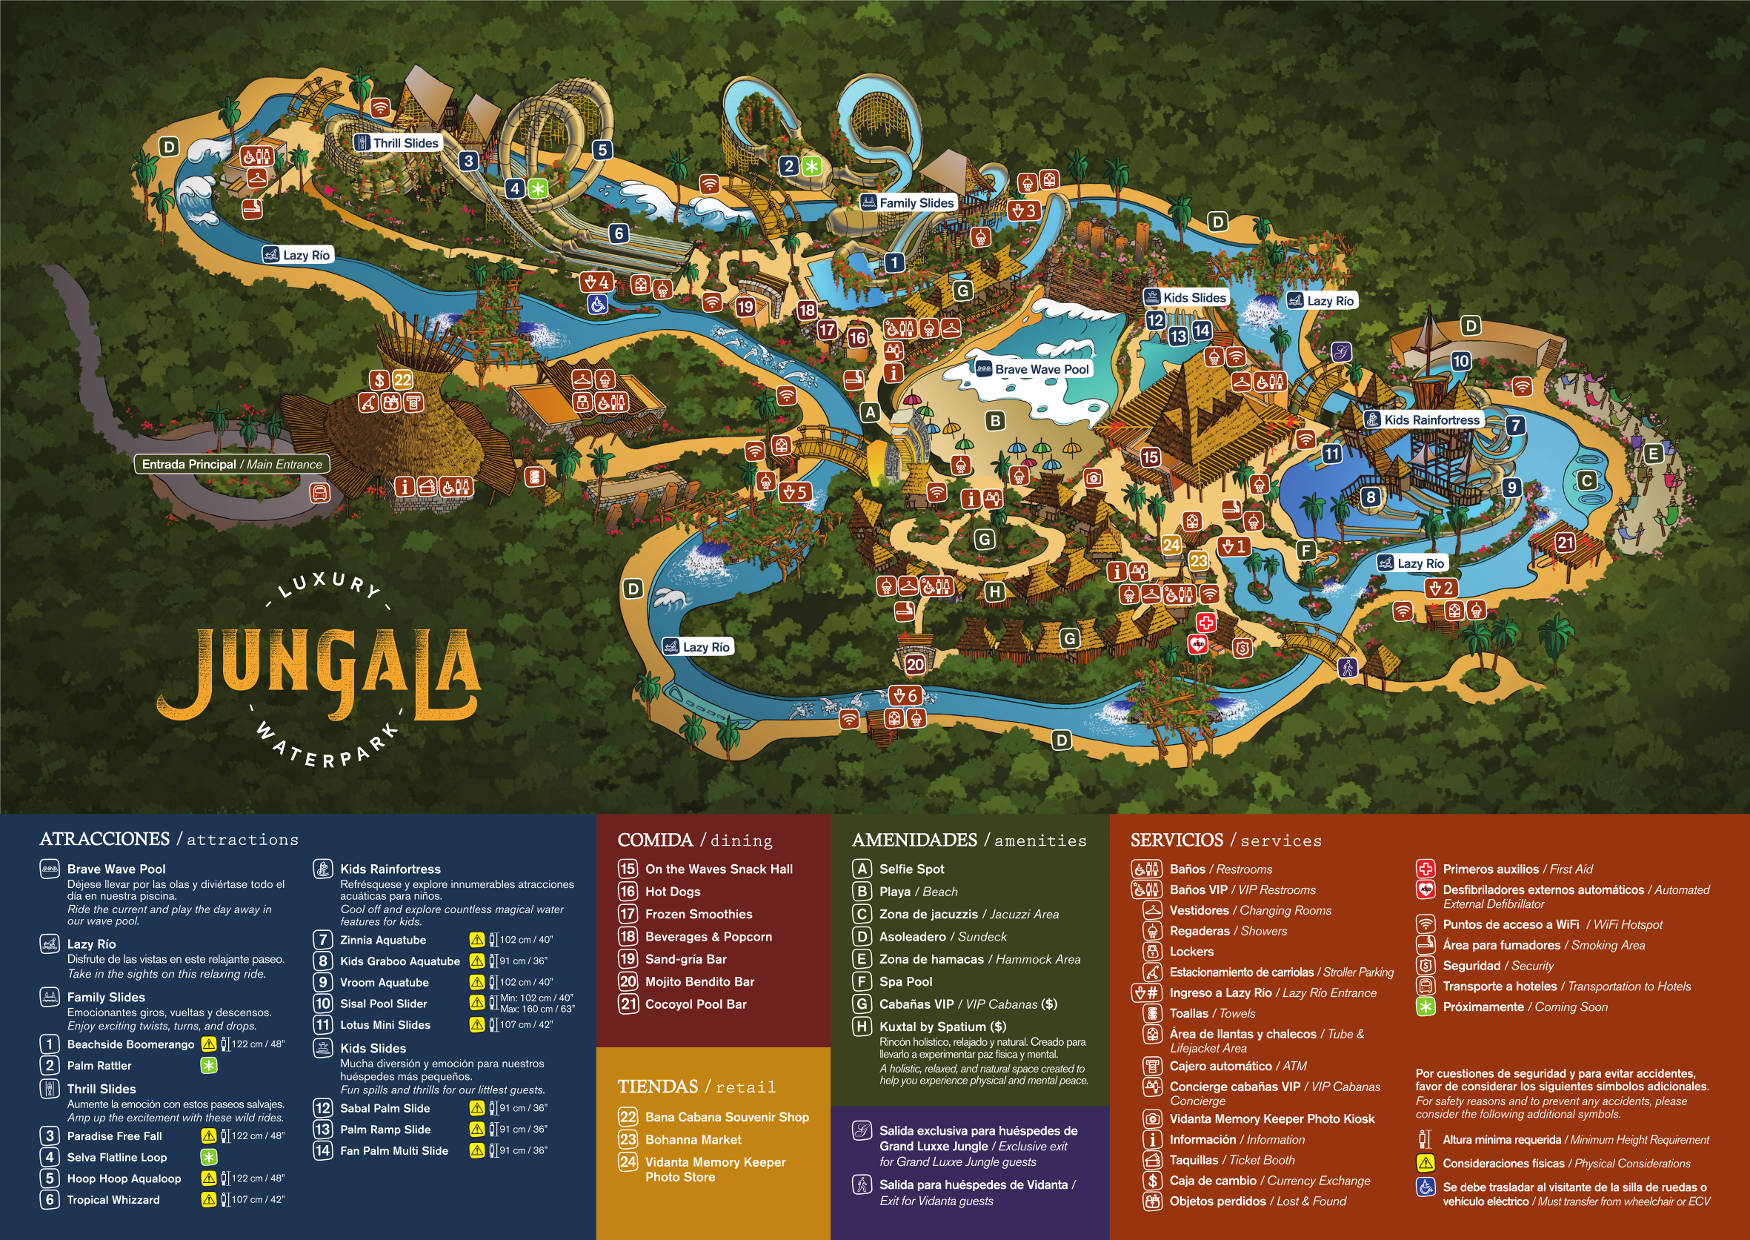 The Jungala Water Park is a luxury water park.  It offers water slides, wave pools, shopping, restaurants and many other amenities.  It is open to the public as well as members of the resorts at Grupo Vidanta’s Riviera Maya Property.